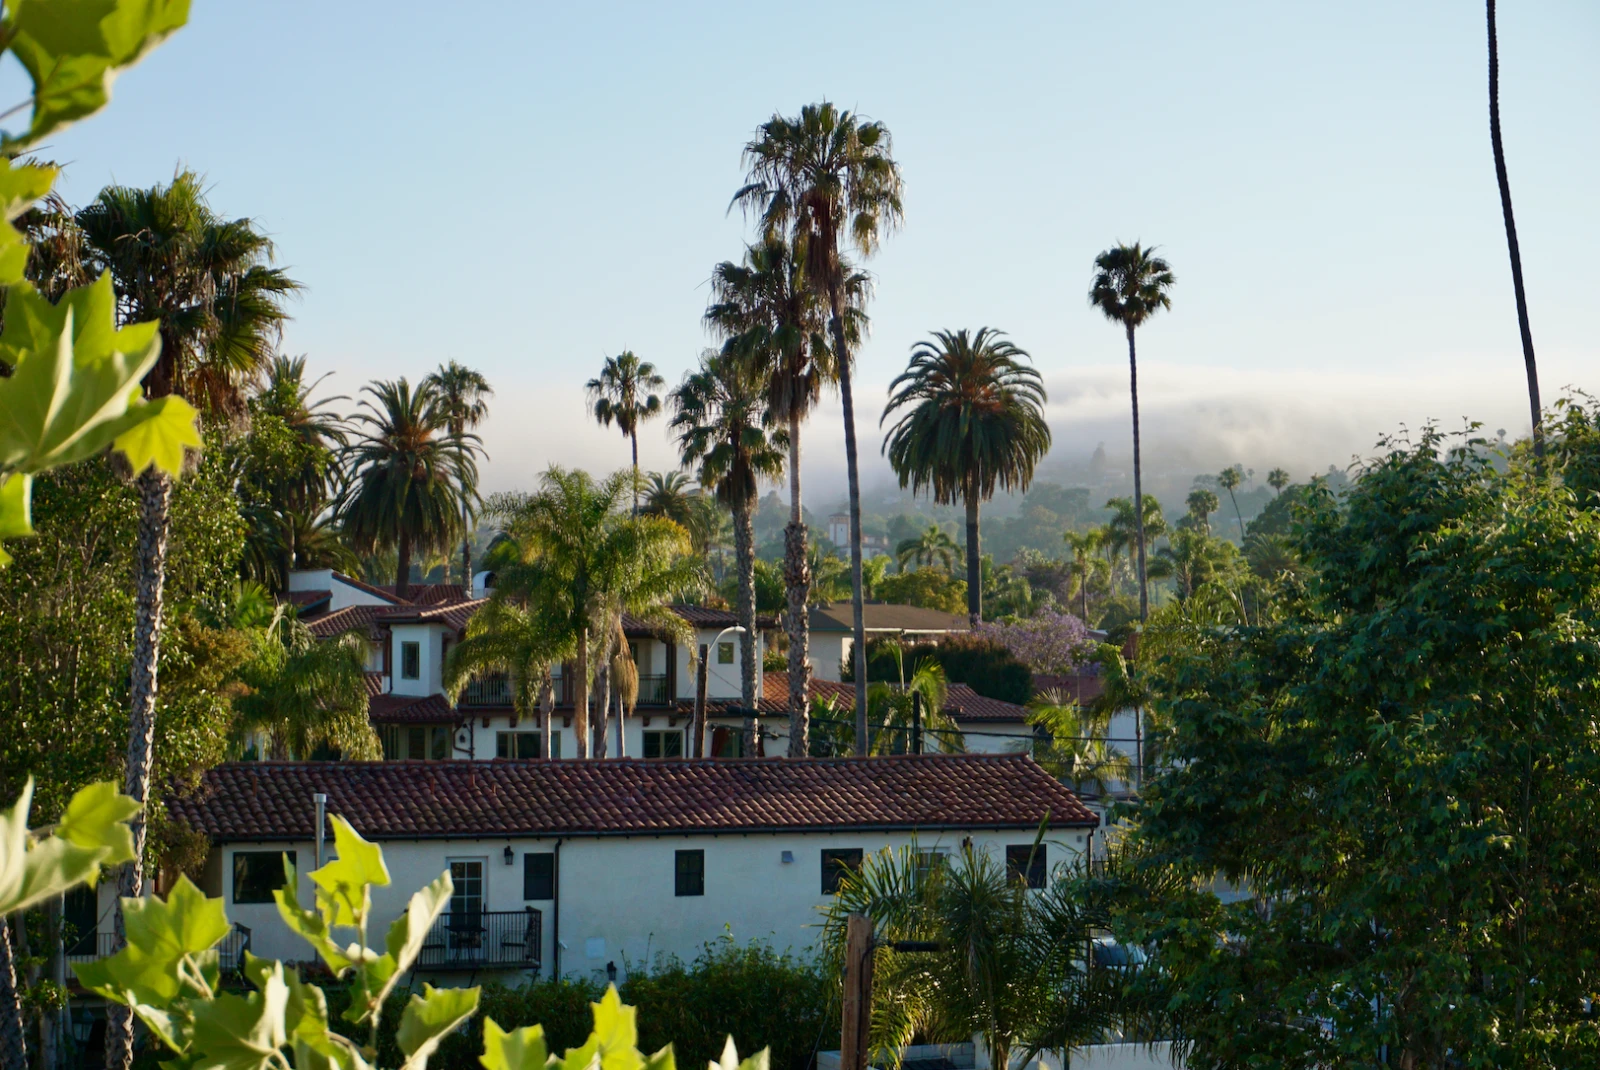 A view from a roof top in Santa Barbara. 